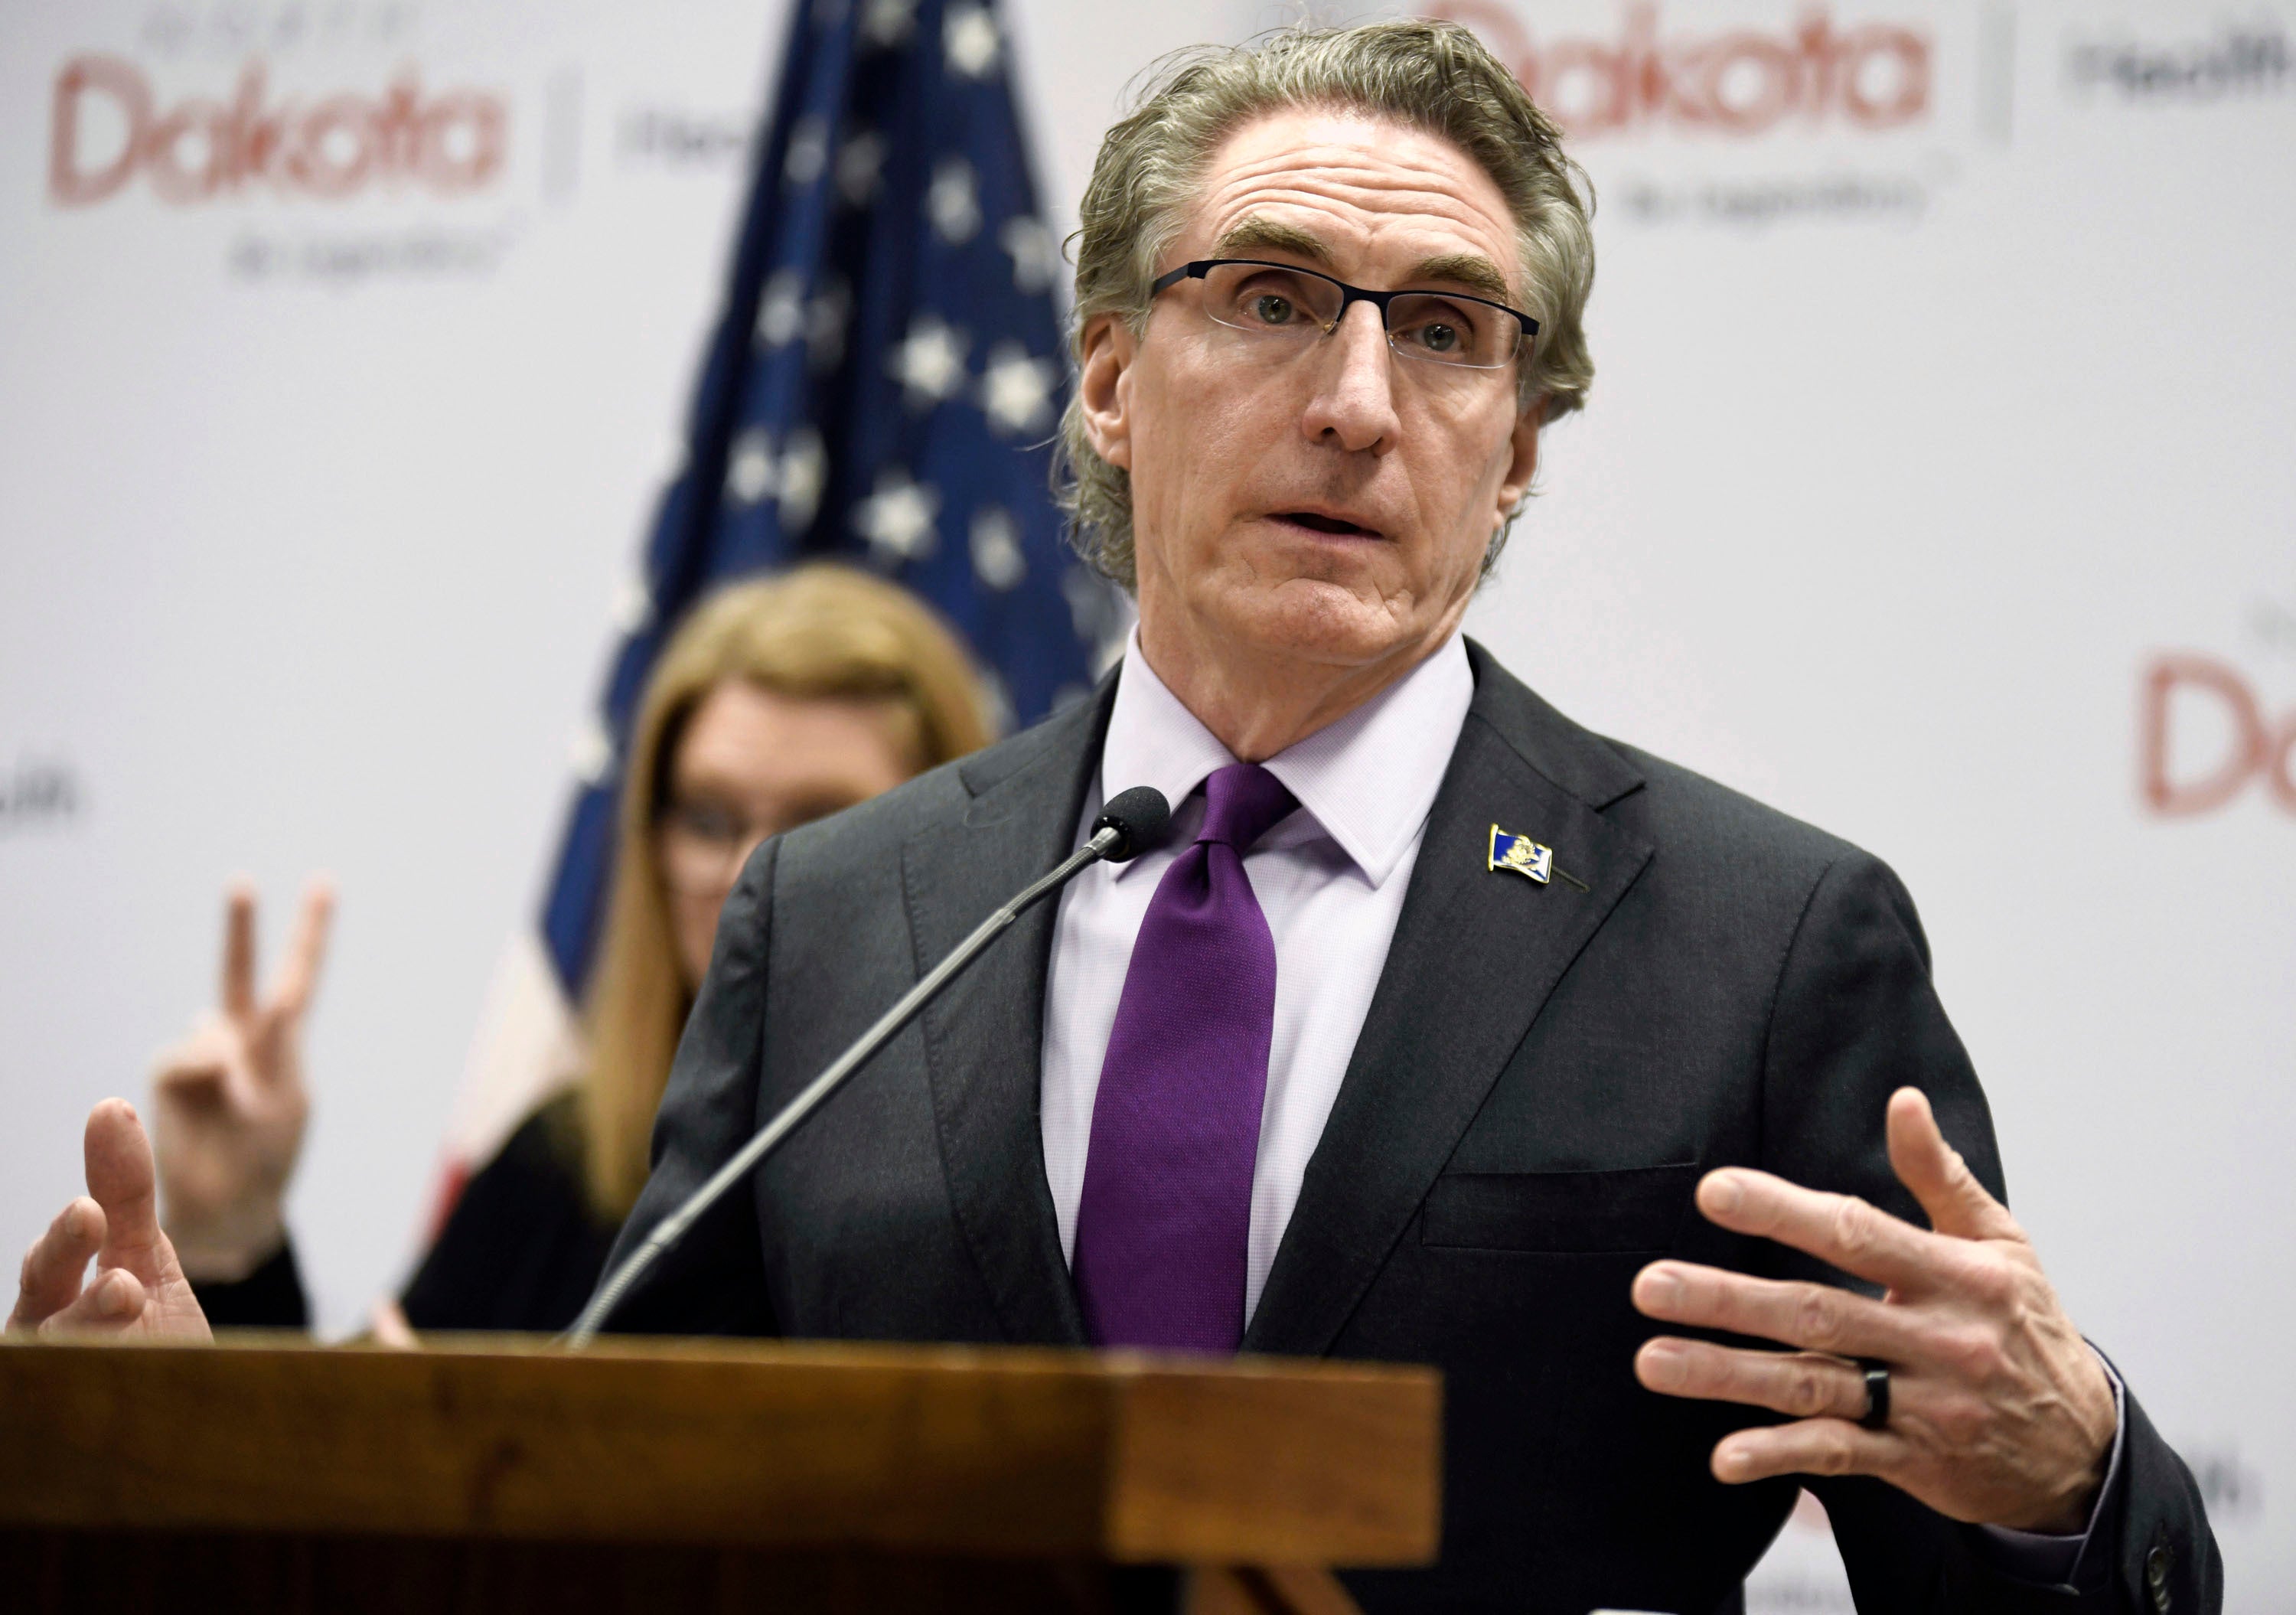 Doug Burgum lasted six months in the race